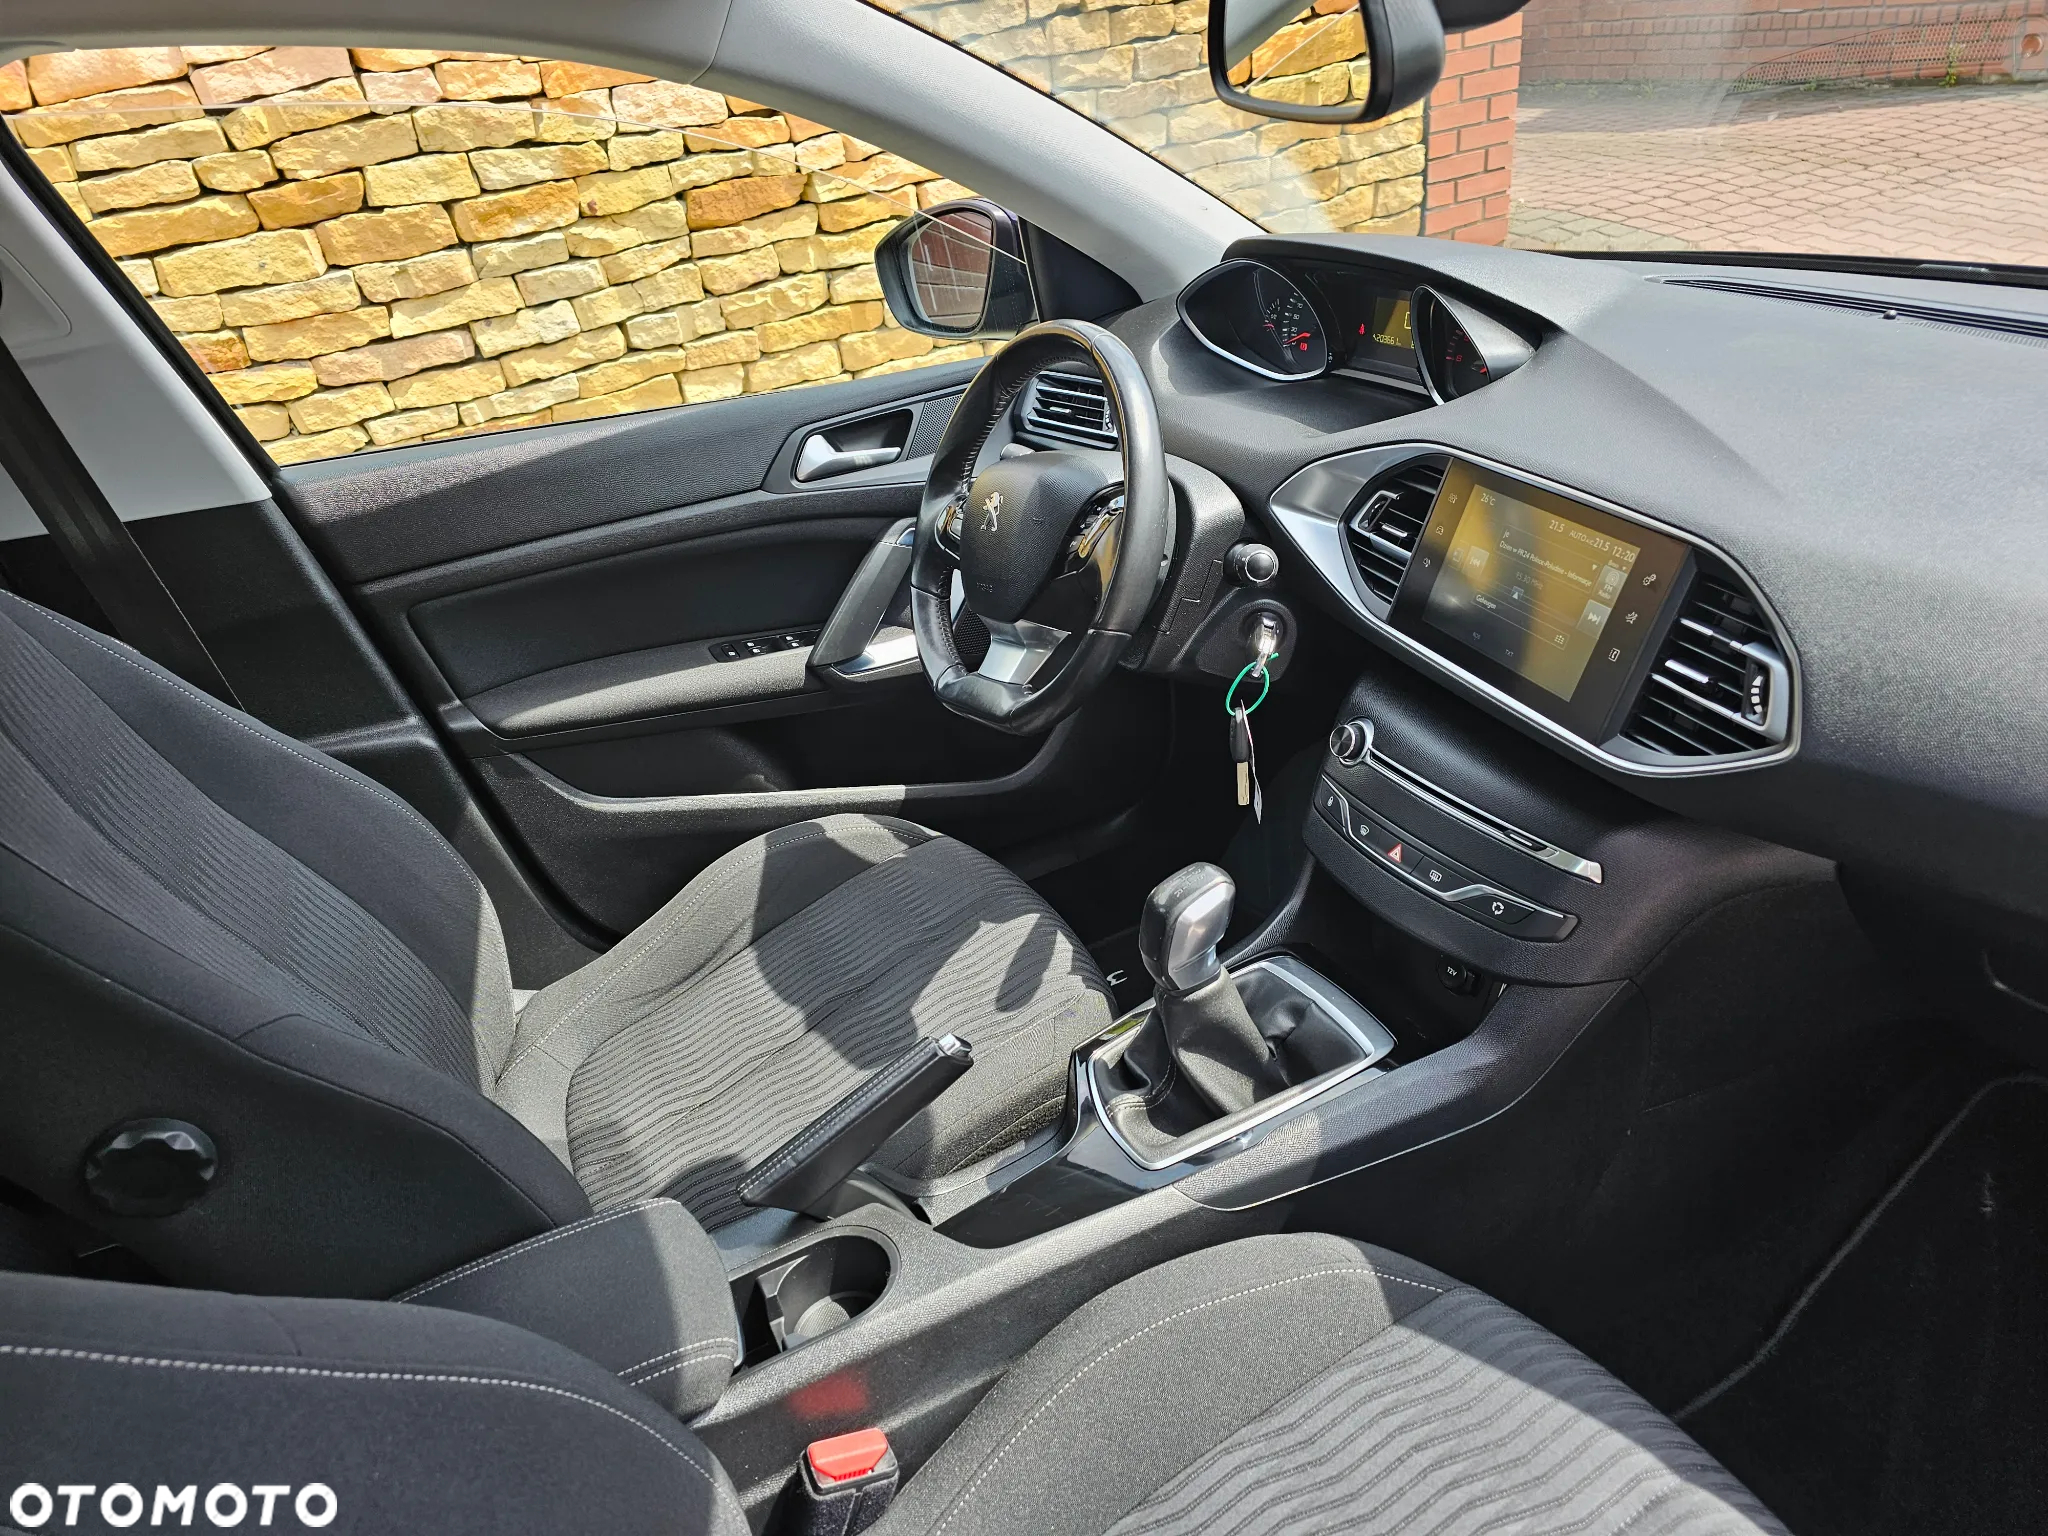 Peugeot 308 1.6 HDi Active - 26